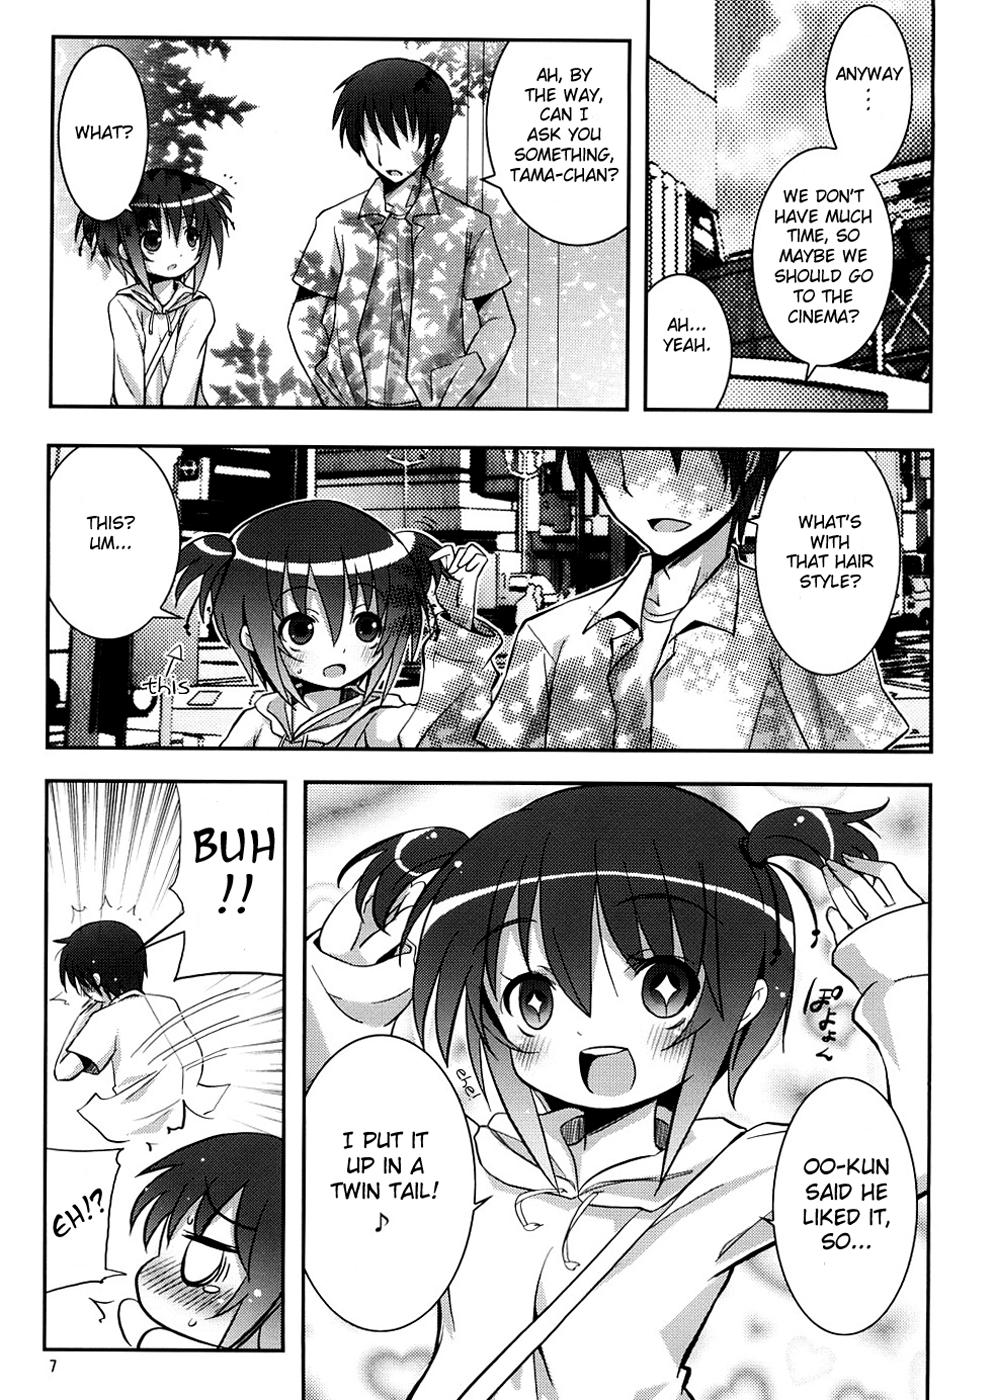 Food Tama-chan to Date. - Bamboo blade Dancing - Page 6